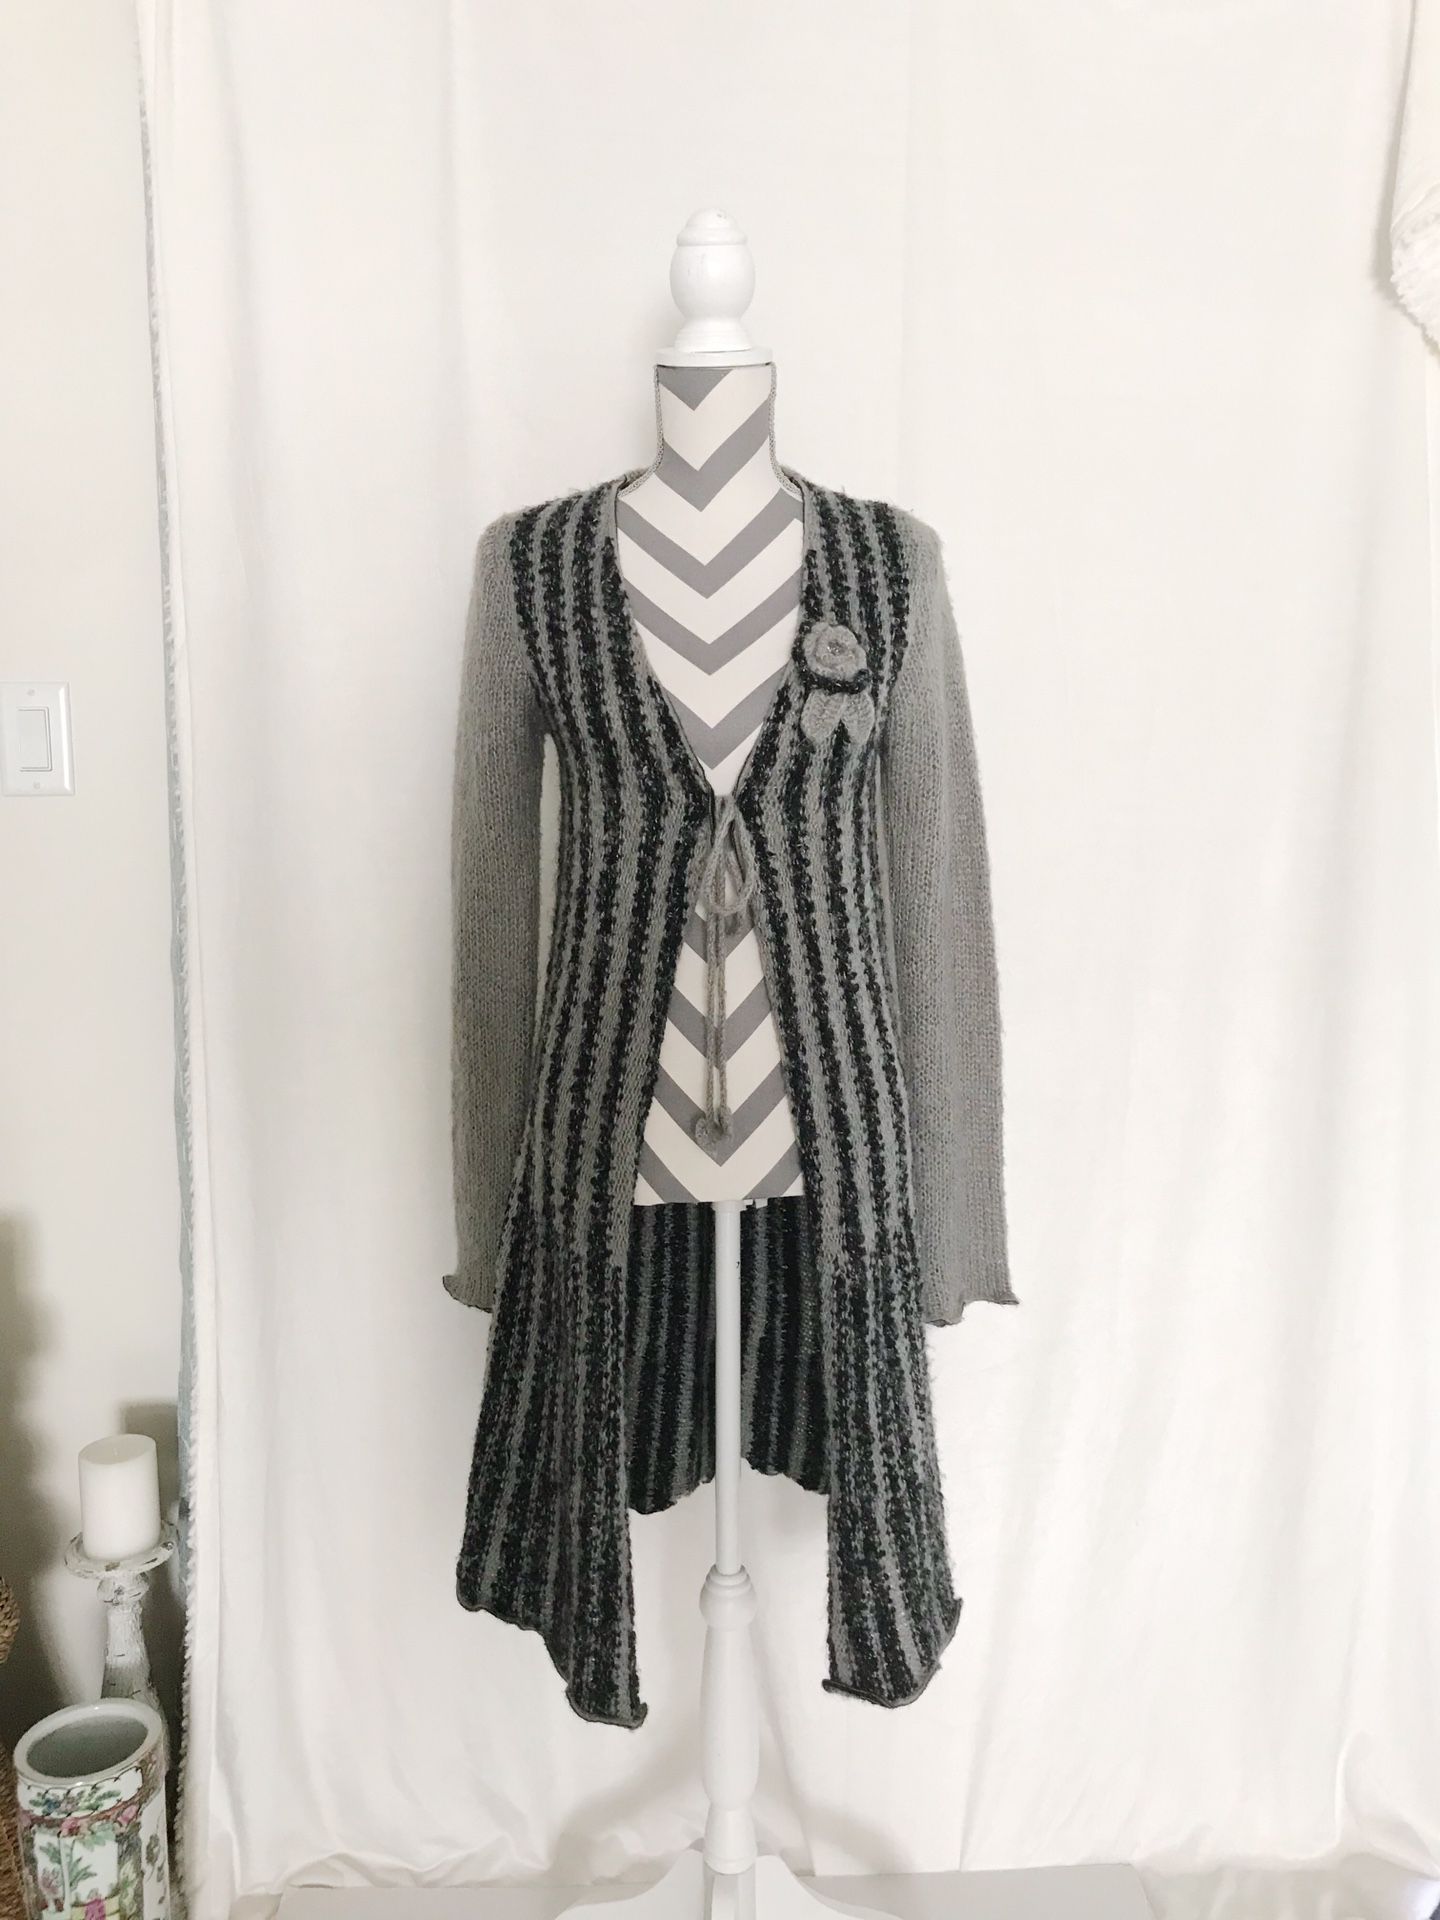 BCBG MaxAzria Mohair/Wool Cable Knit Long Cardigan - Size S